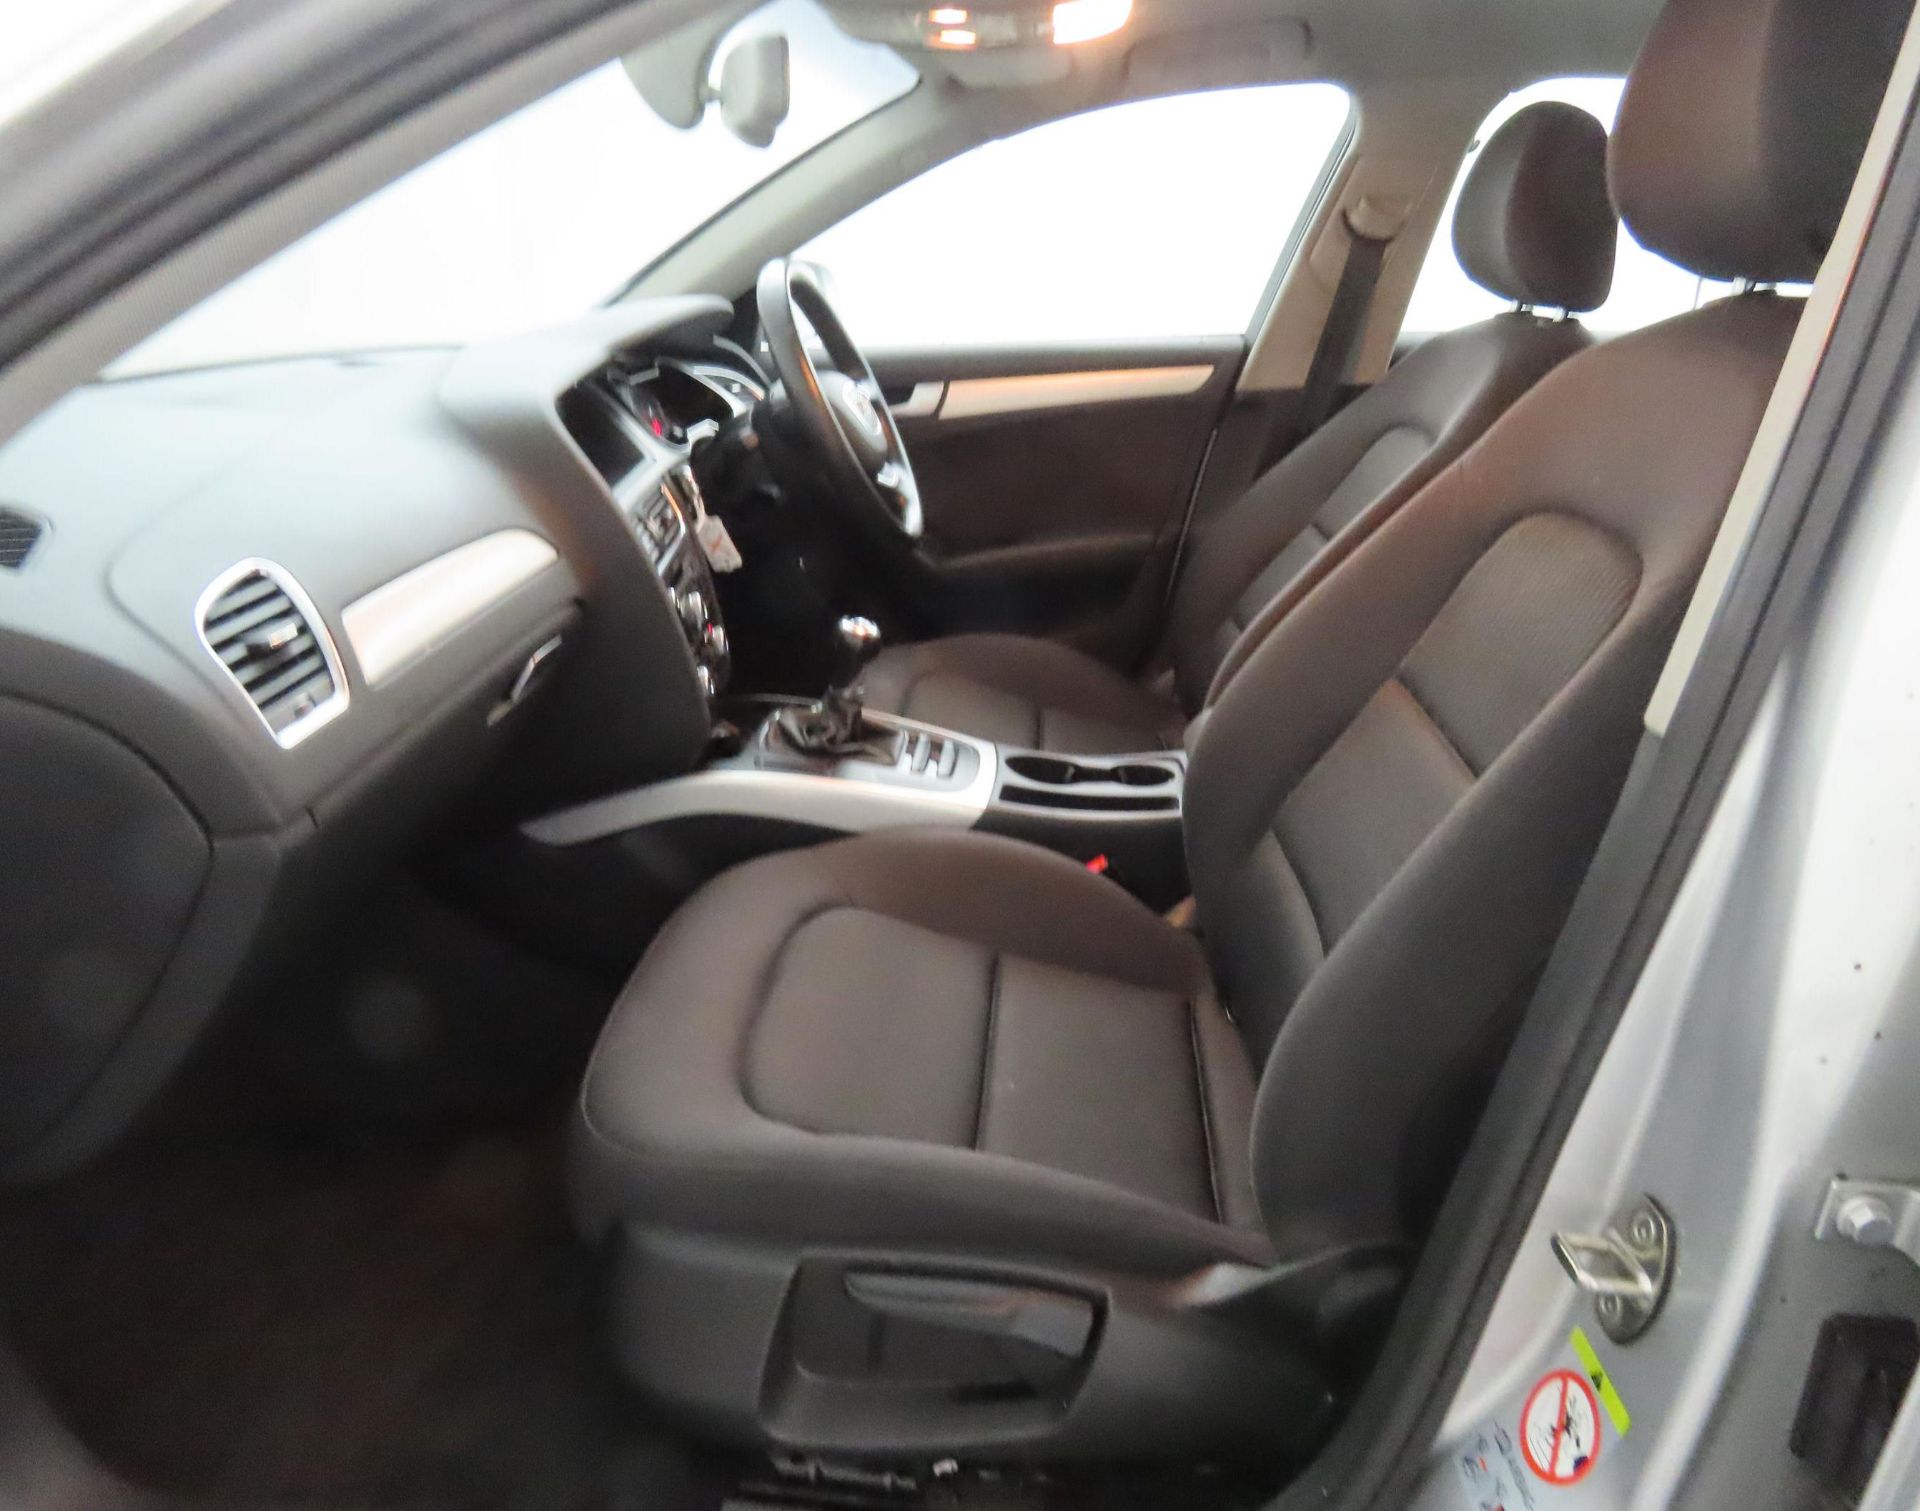 2013 Audi A4 2.0 Tdi SE 4 Door Saloon - CL505 - NO VAT ON THE HAMMER - Location: Corby - Image 6 of 12